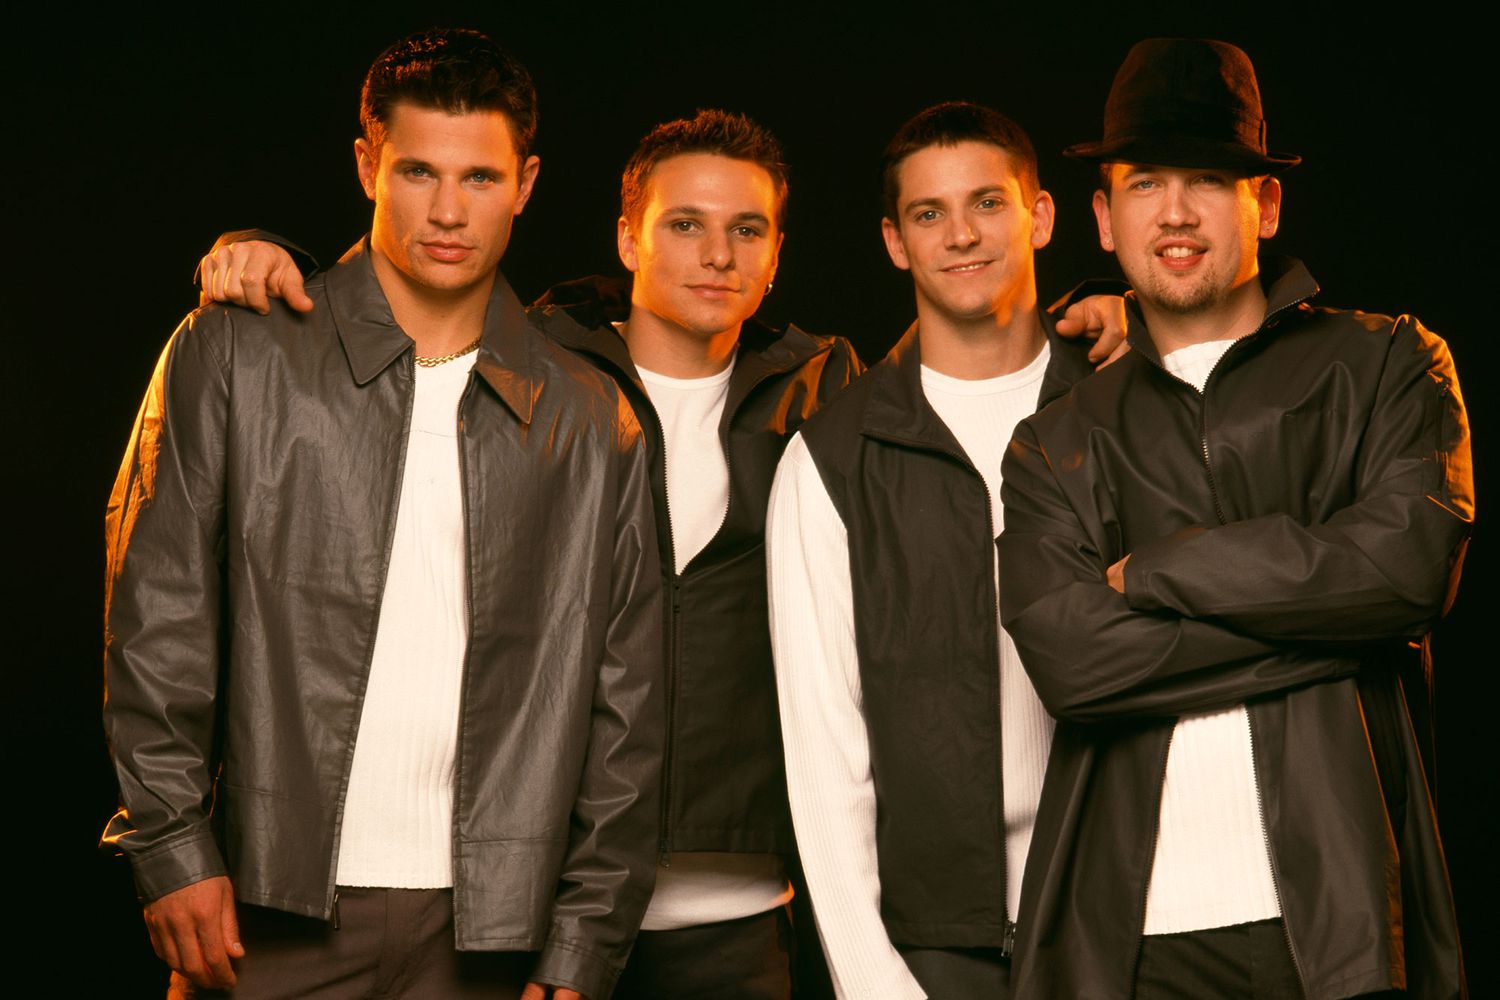 Nick Lachey, Drew Lachey, Jeff Timmons, and Justin Jeffre of 98 Degrees